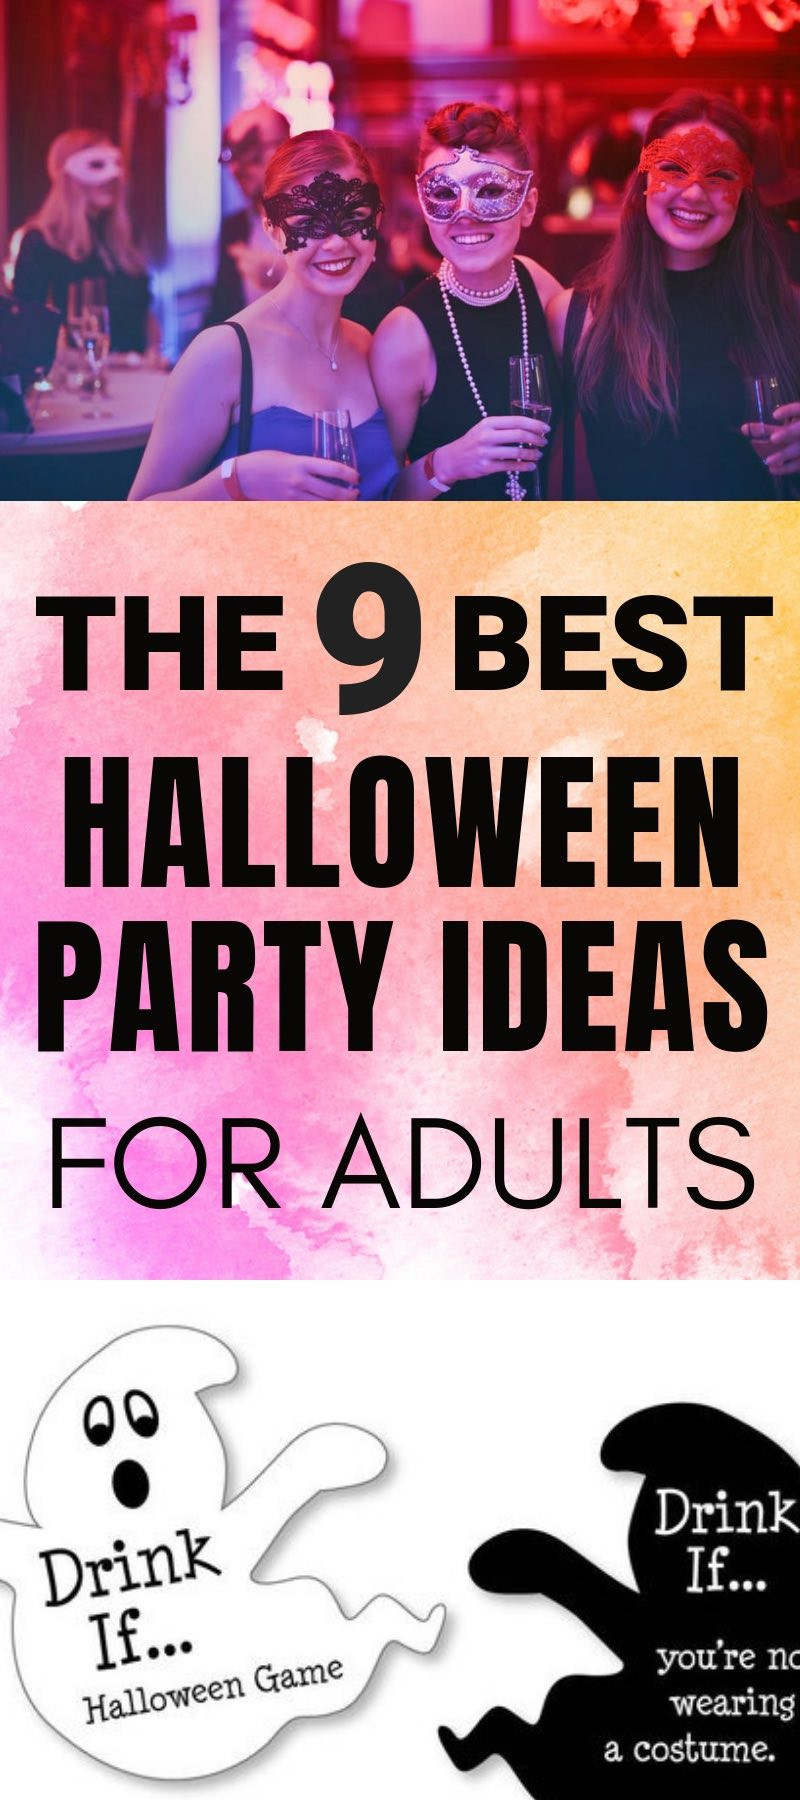 Free Halloween Party Game Ideas
 9 Best Halloween Party Games for Adults that are Free or Cheap